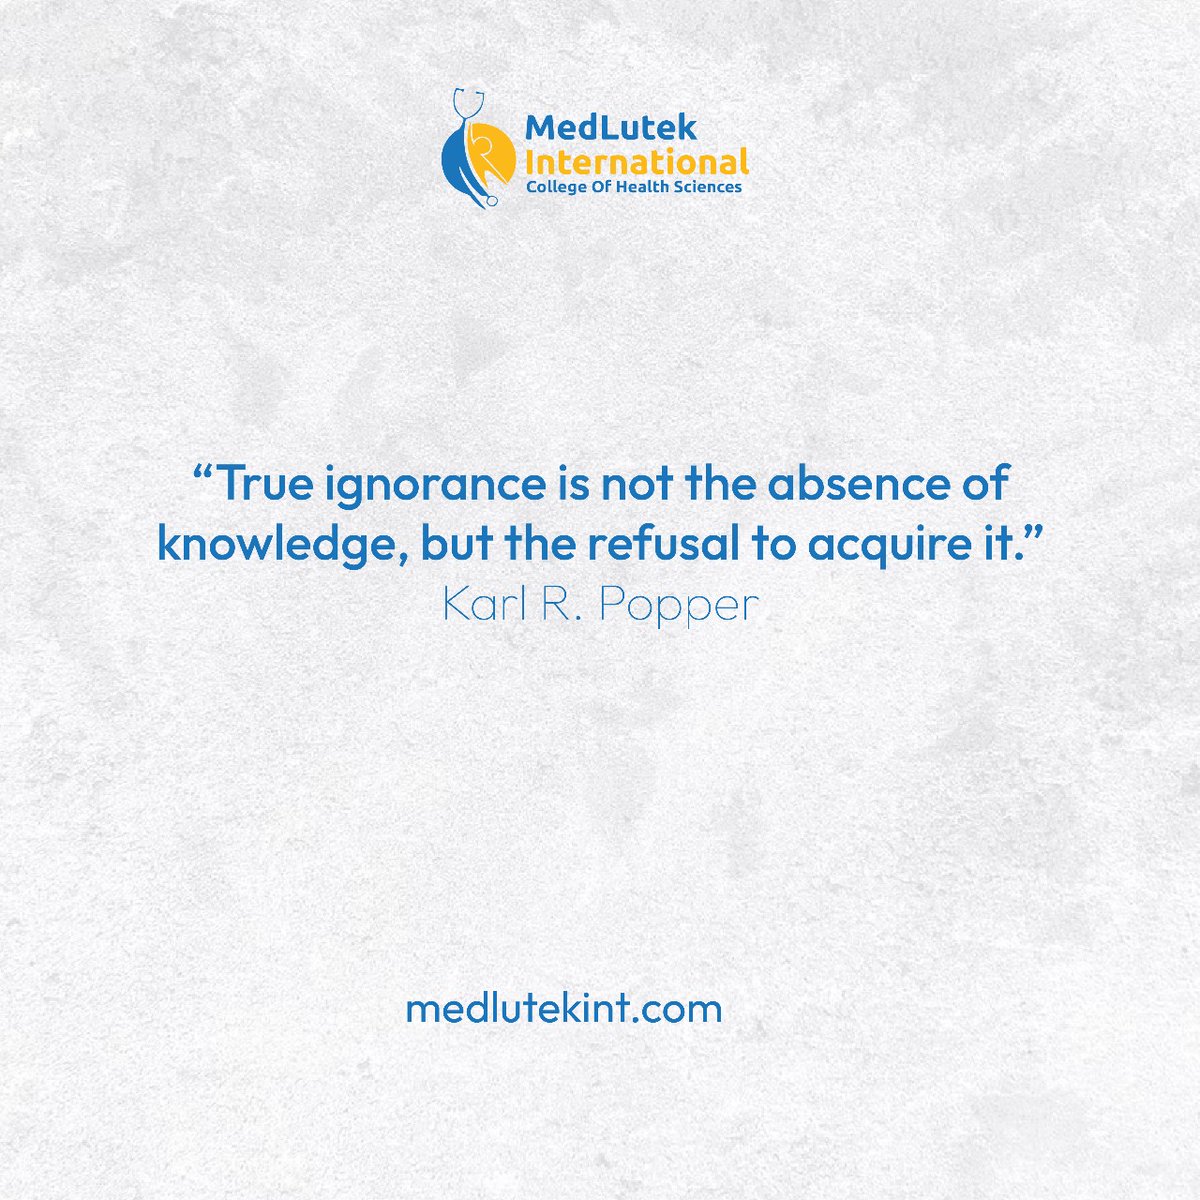 #WisdomWednesday 

True ignorance isn't about what you don't know, but rather, what you choose not to learn.

#Medlutekcares #Healthcarelearning